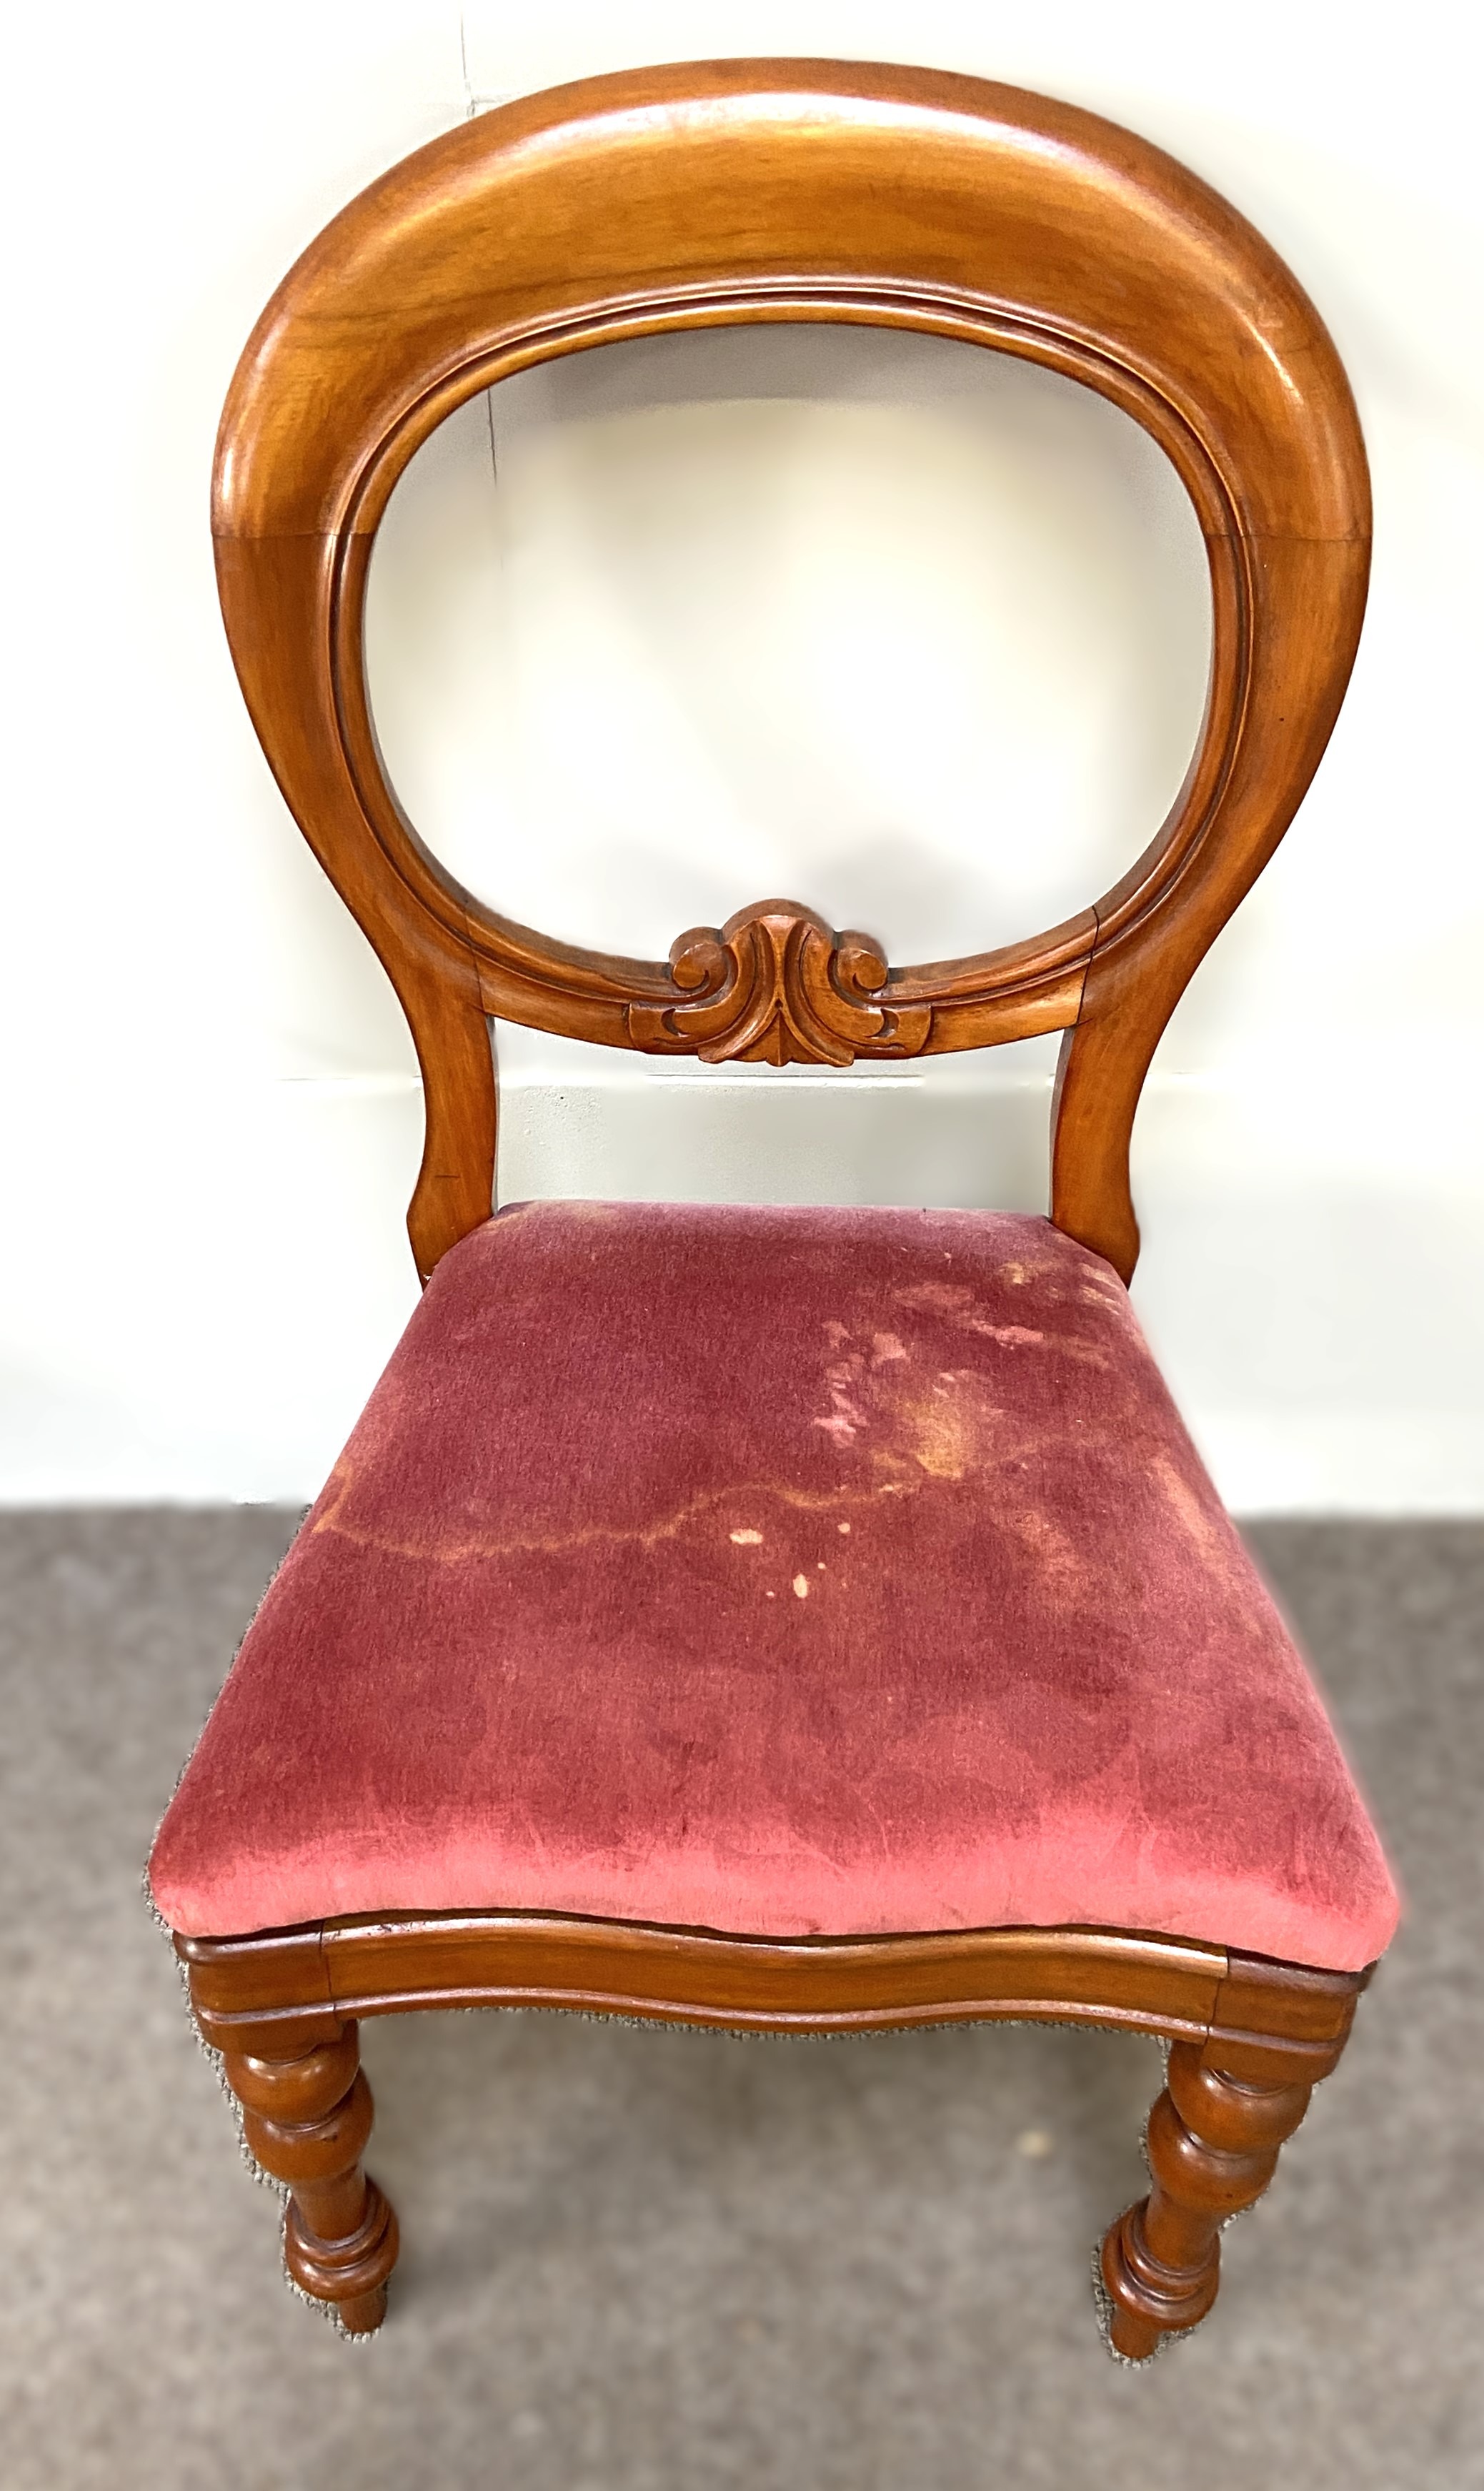 A set of Victorian style balloon backed dining chairs, each with a stuffed seat squab, currently - Image 2 of 5